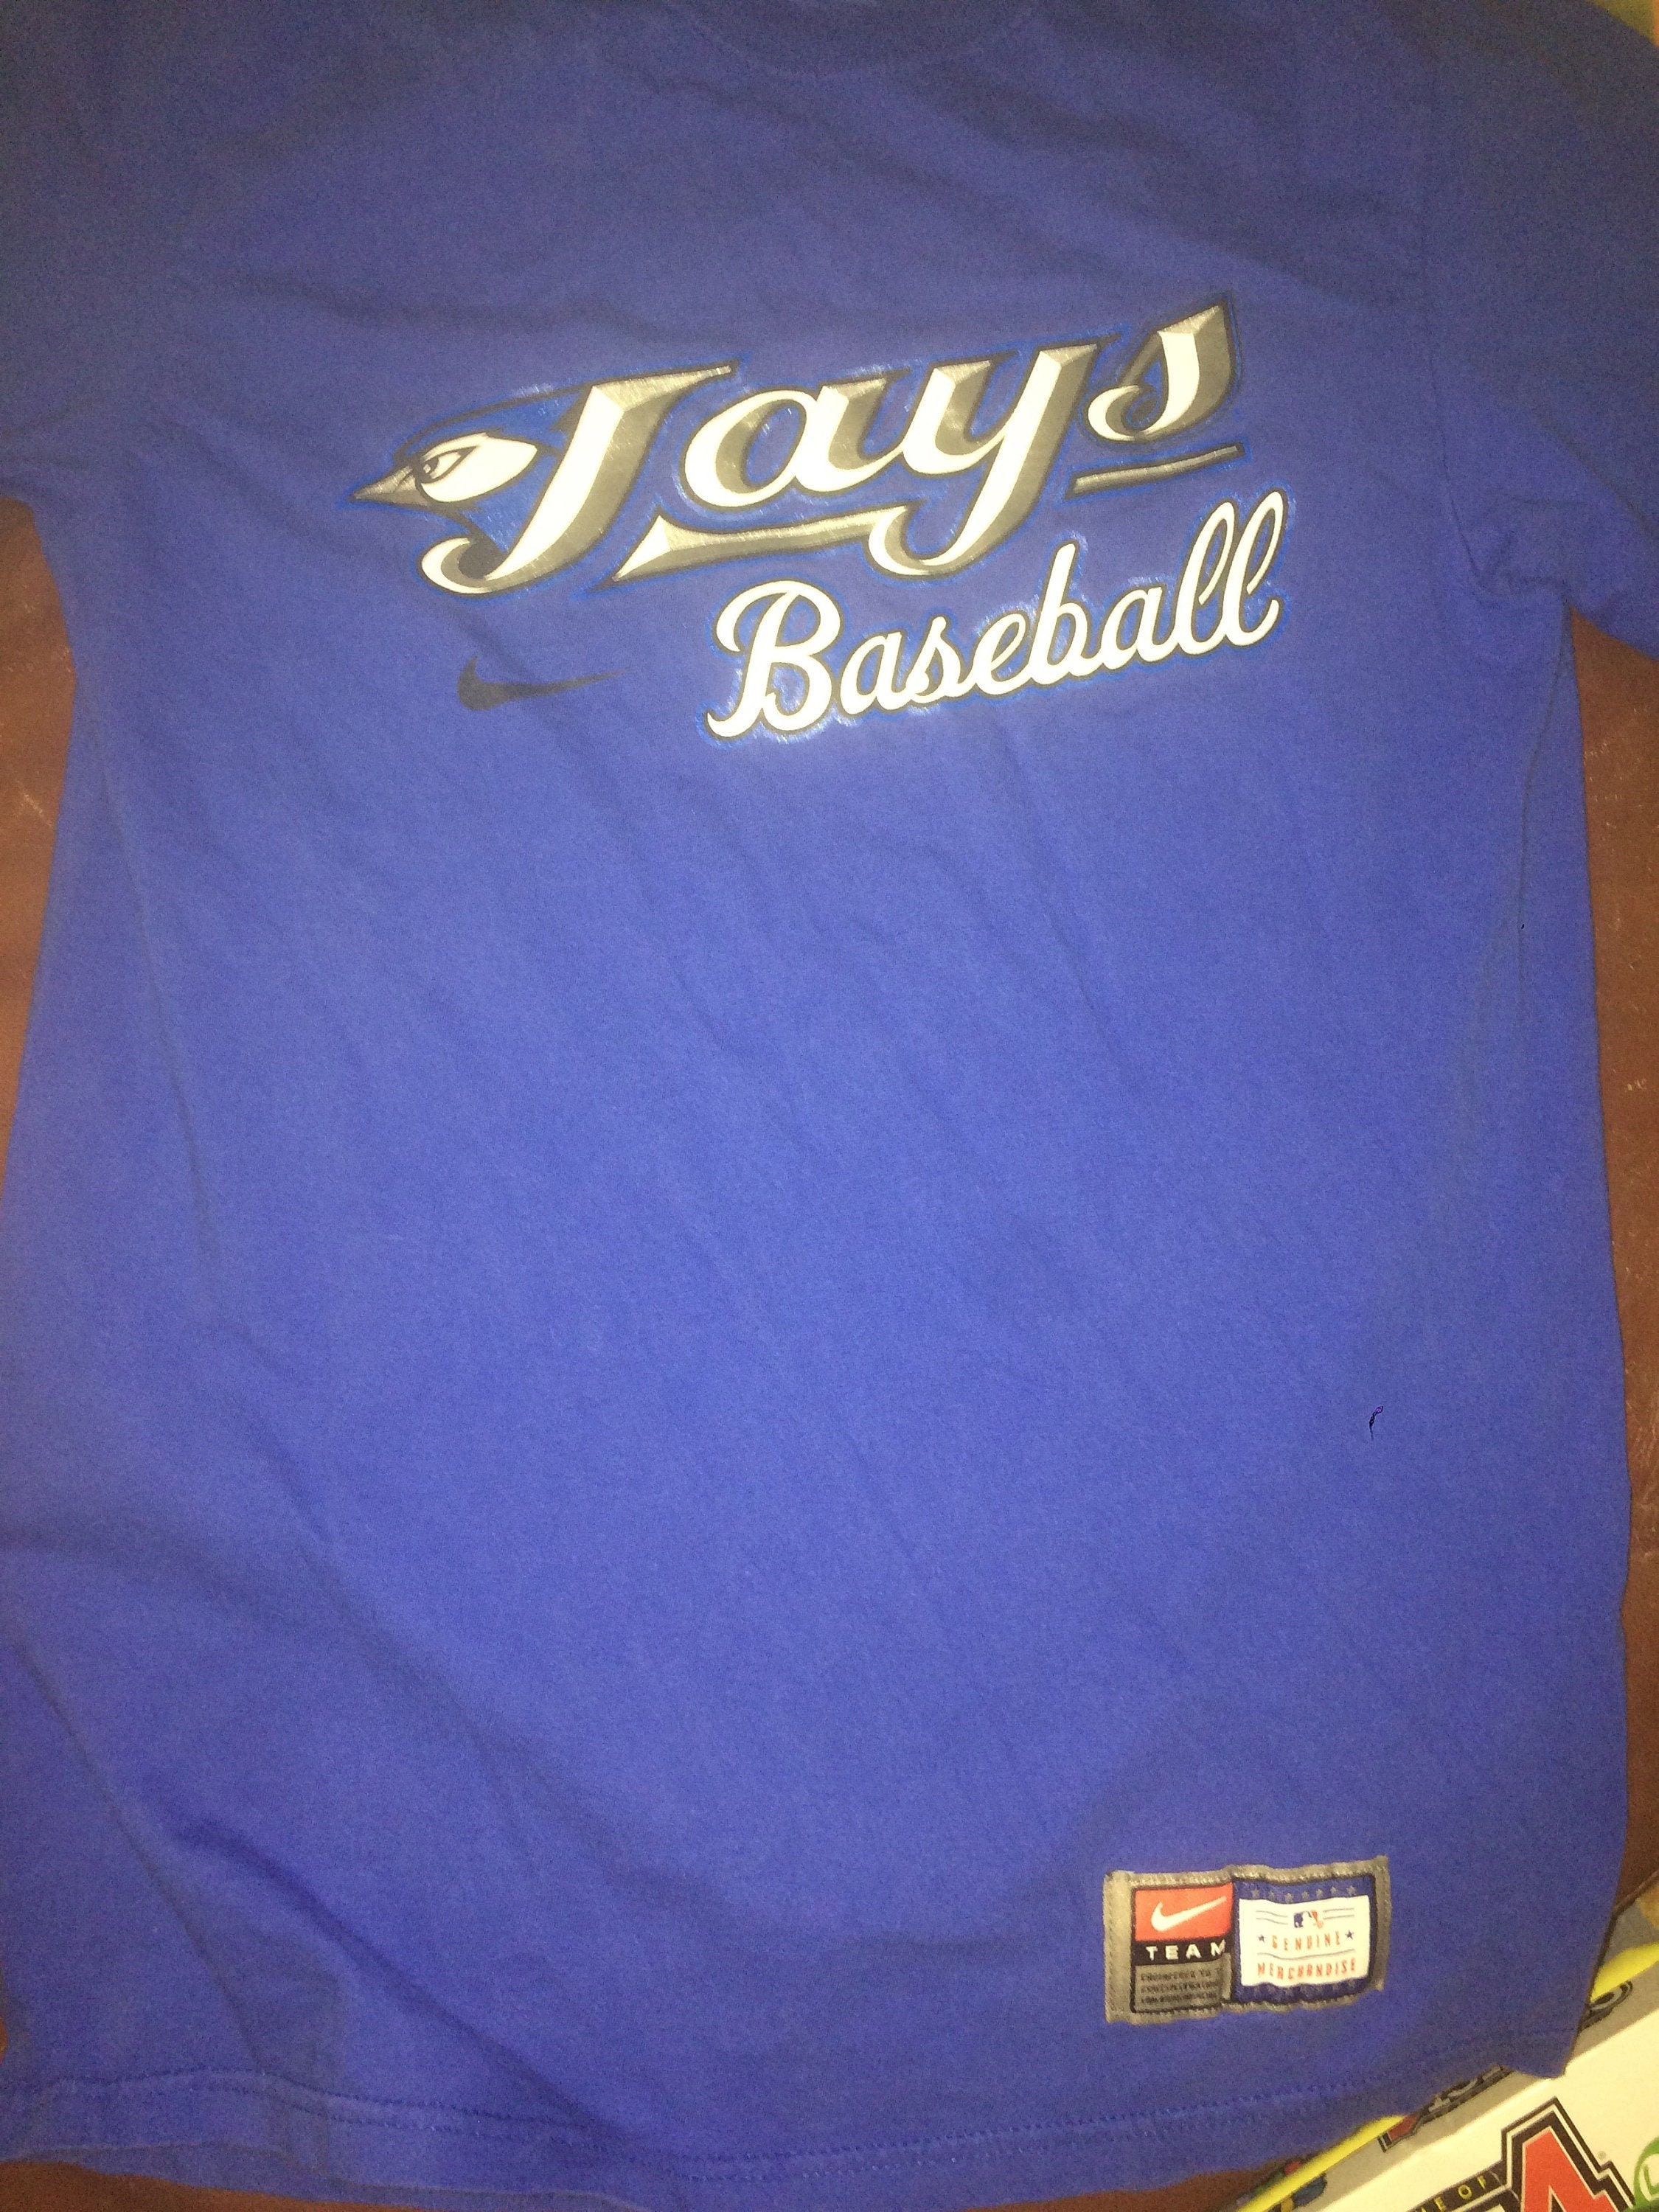 Nike Tampa Bay Rays T-Shirts in Tampa Bay Rays Team Shop 